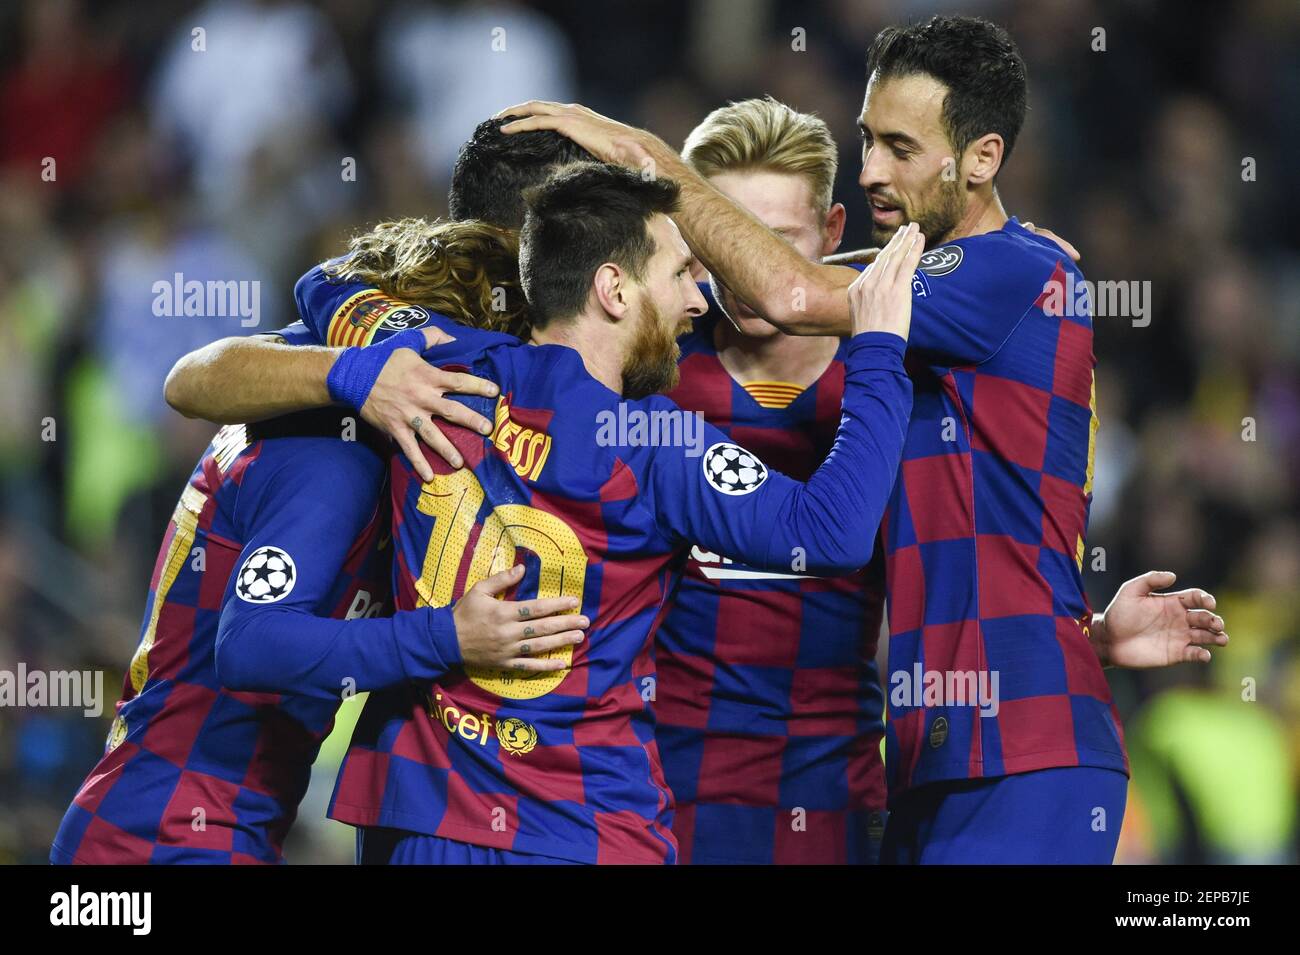 Lionel Messi of Barcelona celebrates his scoring with team-mates during the UEFA Champions League Group F match between FC Barcelona and Borussia Dortmund at Camp Nou Stadium in Barcelona, Spain on November 27, 2019 (Photo by Andrew Surma / SIPA USA) Stock Photo